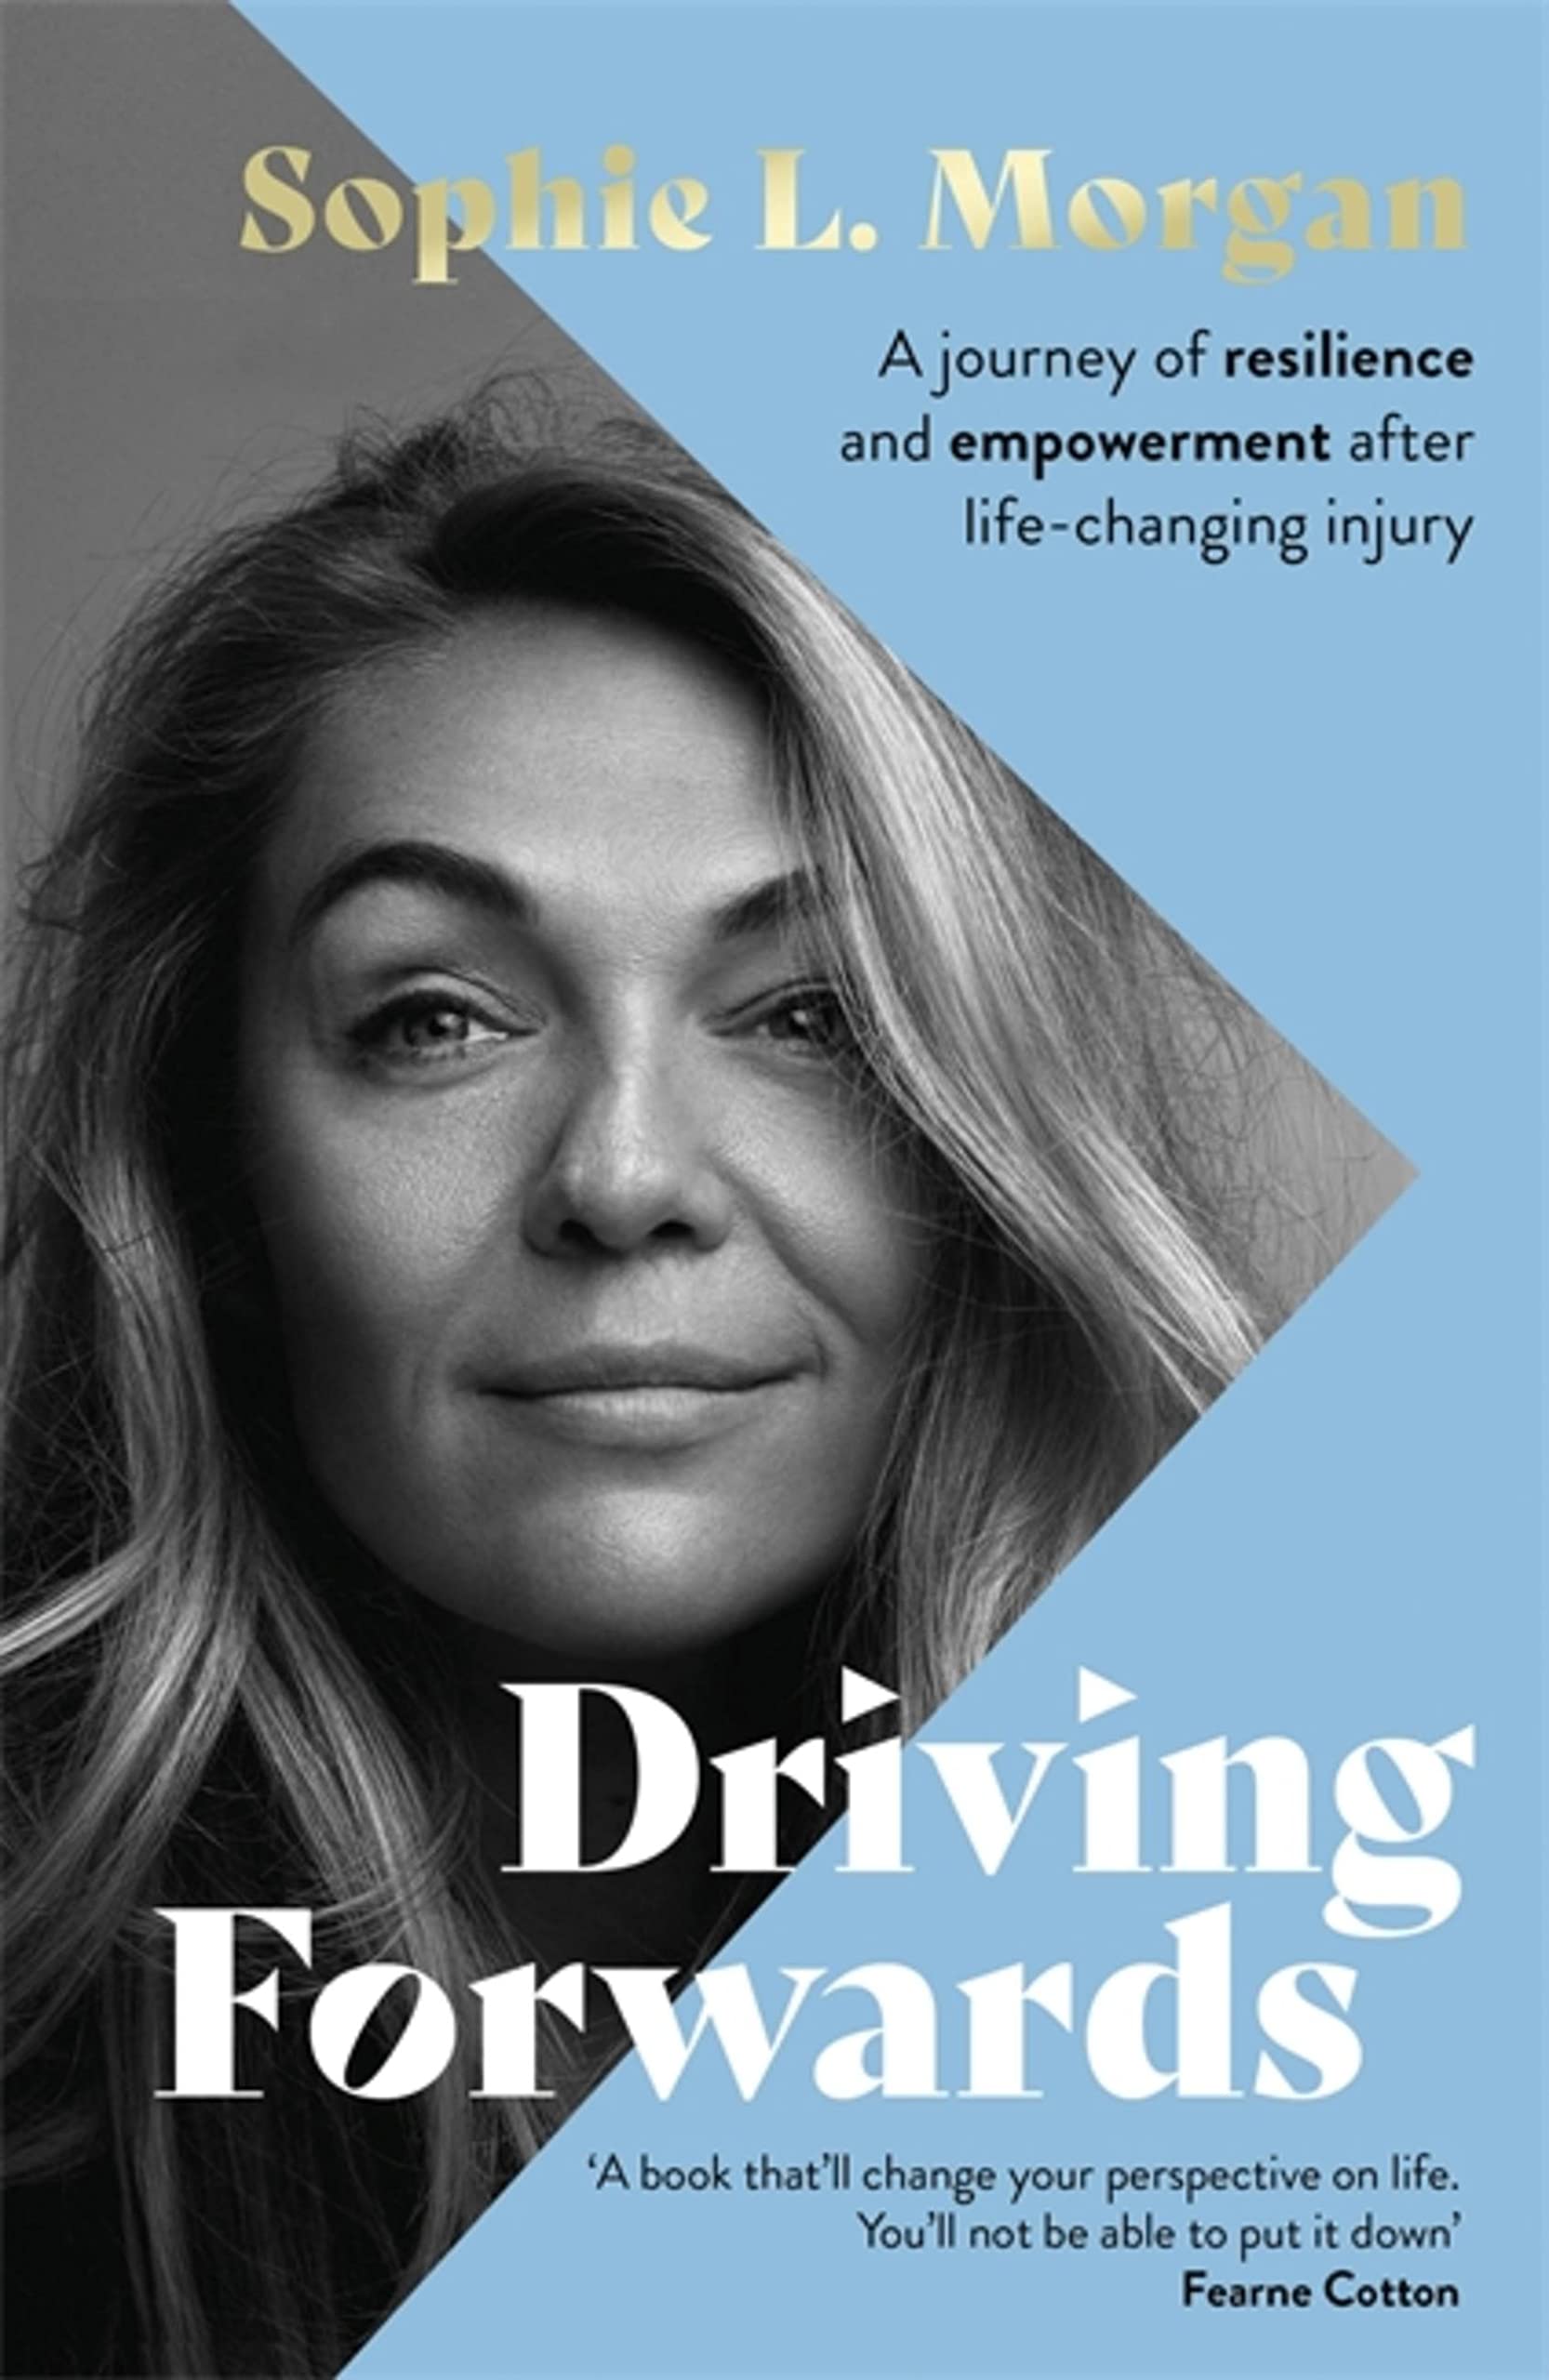 Sophie L. Morgan's Driving Forwards book cover features a photo of Sophie on the back and white with blue detail on the right